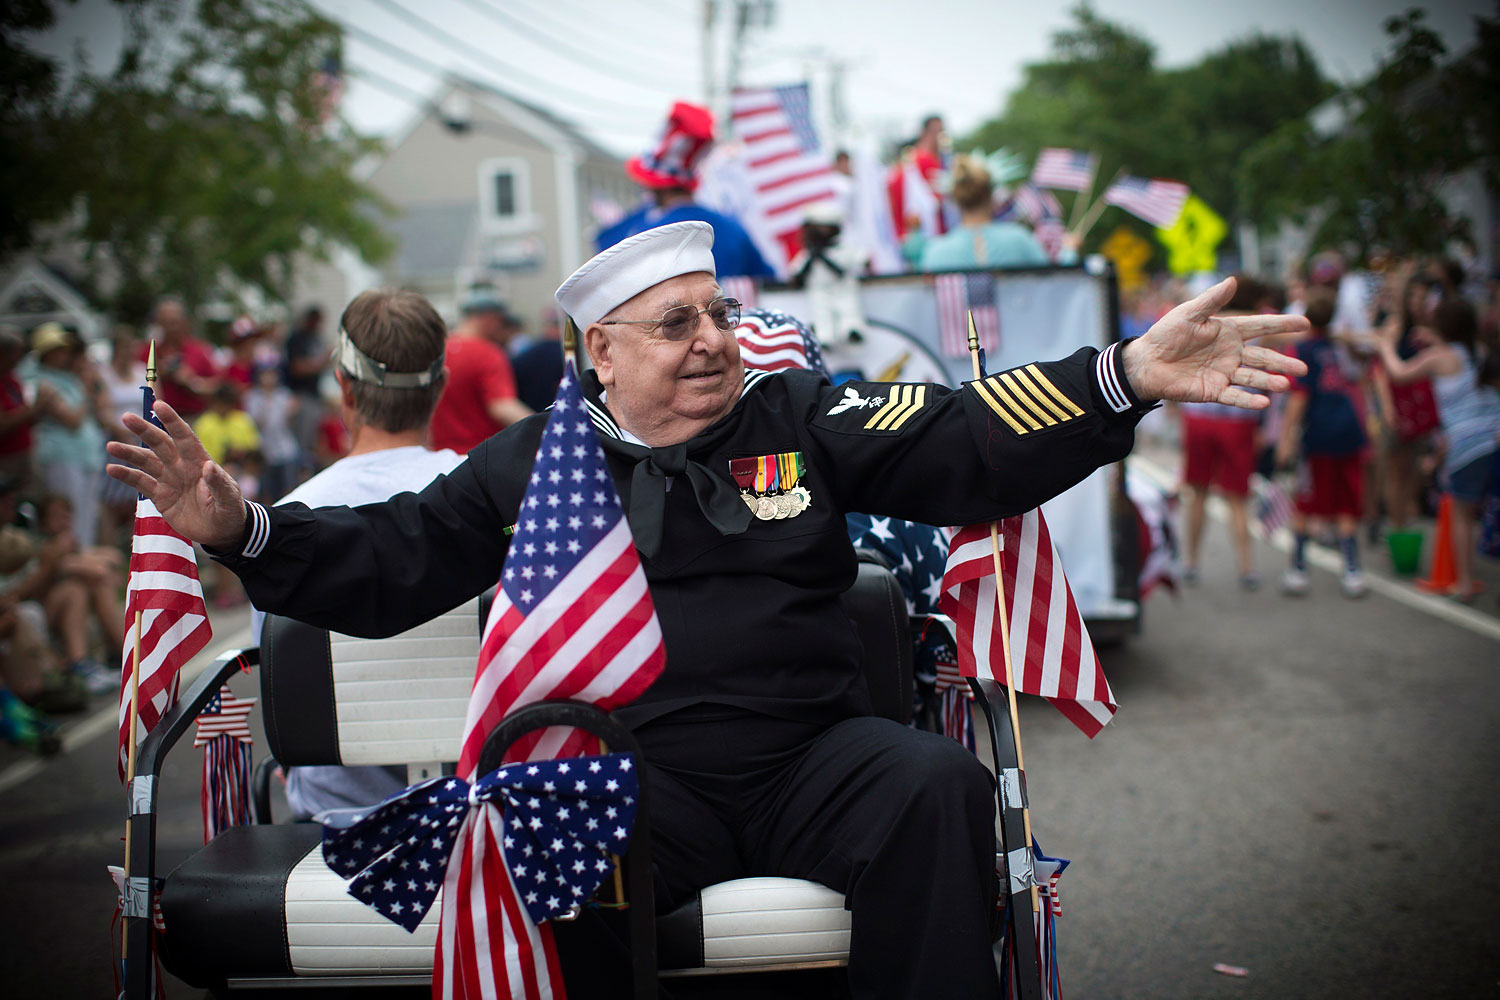 Petrus Kerras, a decorated U.S. Navy veteran of both the Korean and Vietnam wars, rides on a float in a July Fourth parade in the village of Barnstable, Mass. July 4, 2014.